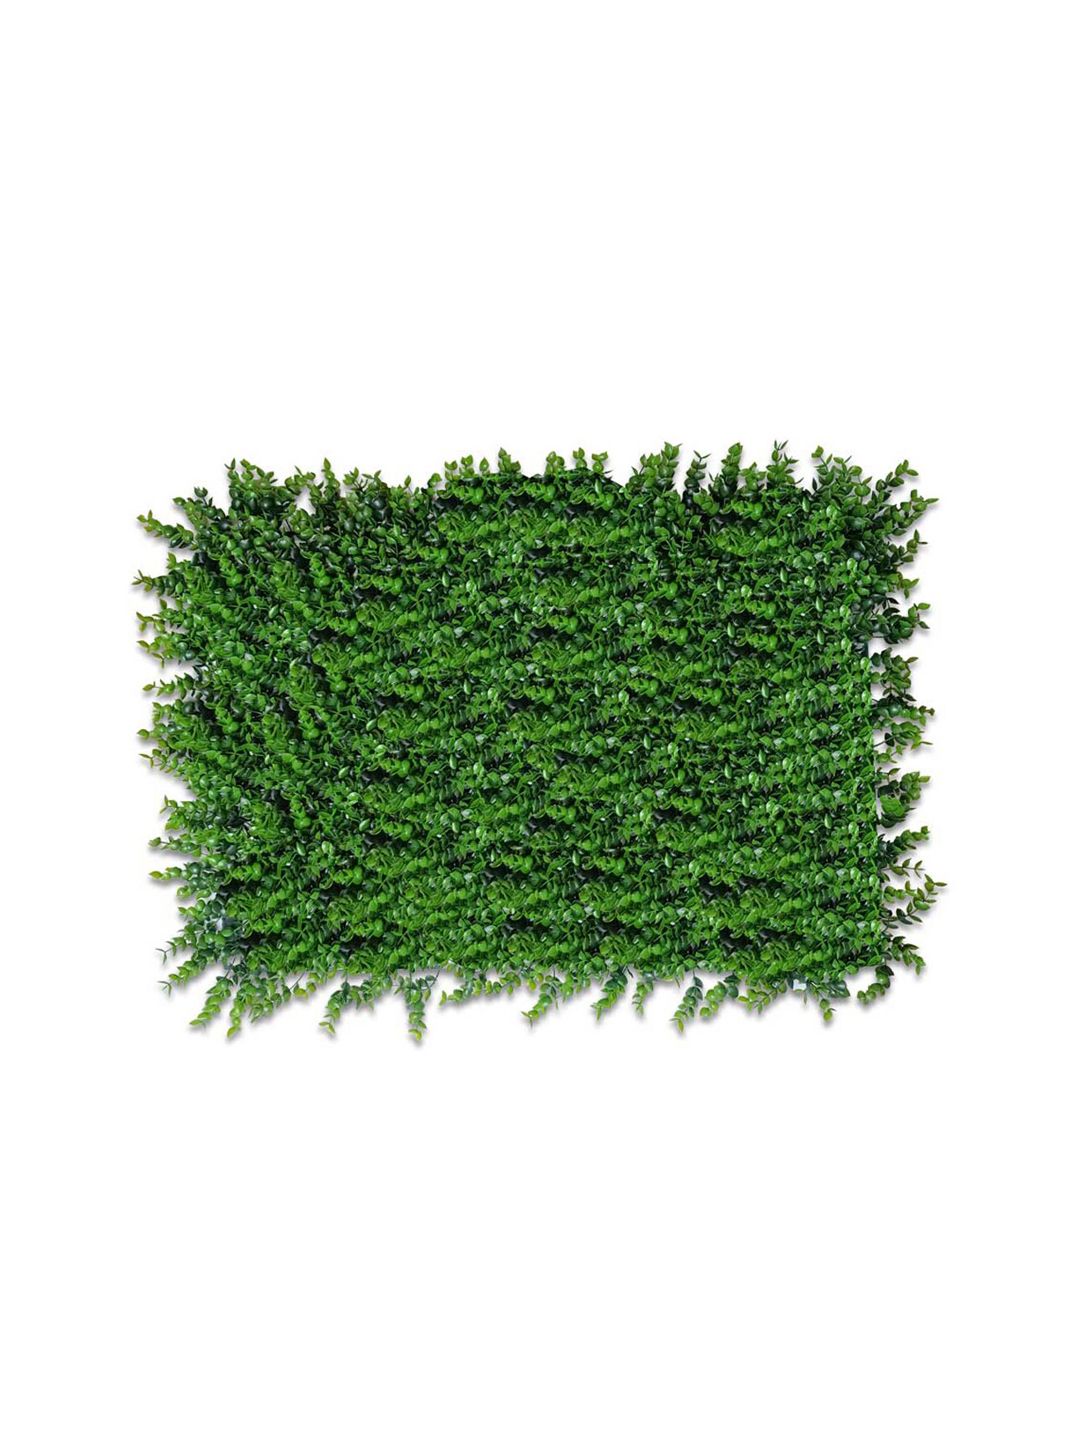 Art Street Green Artificial Grass For Home Decoration Price in India